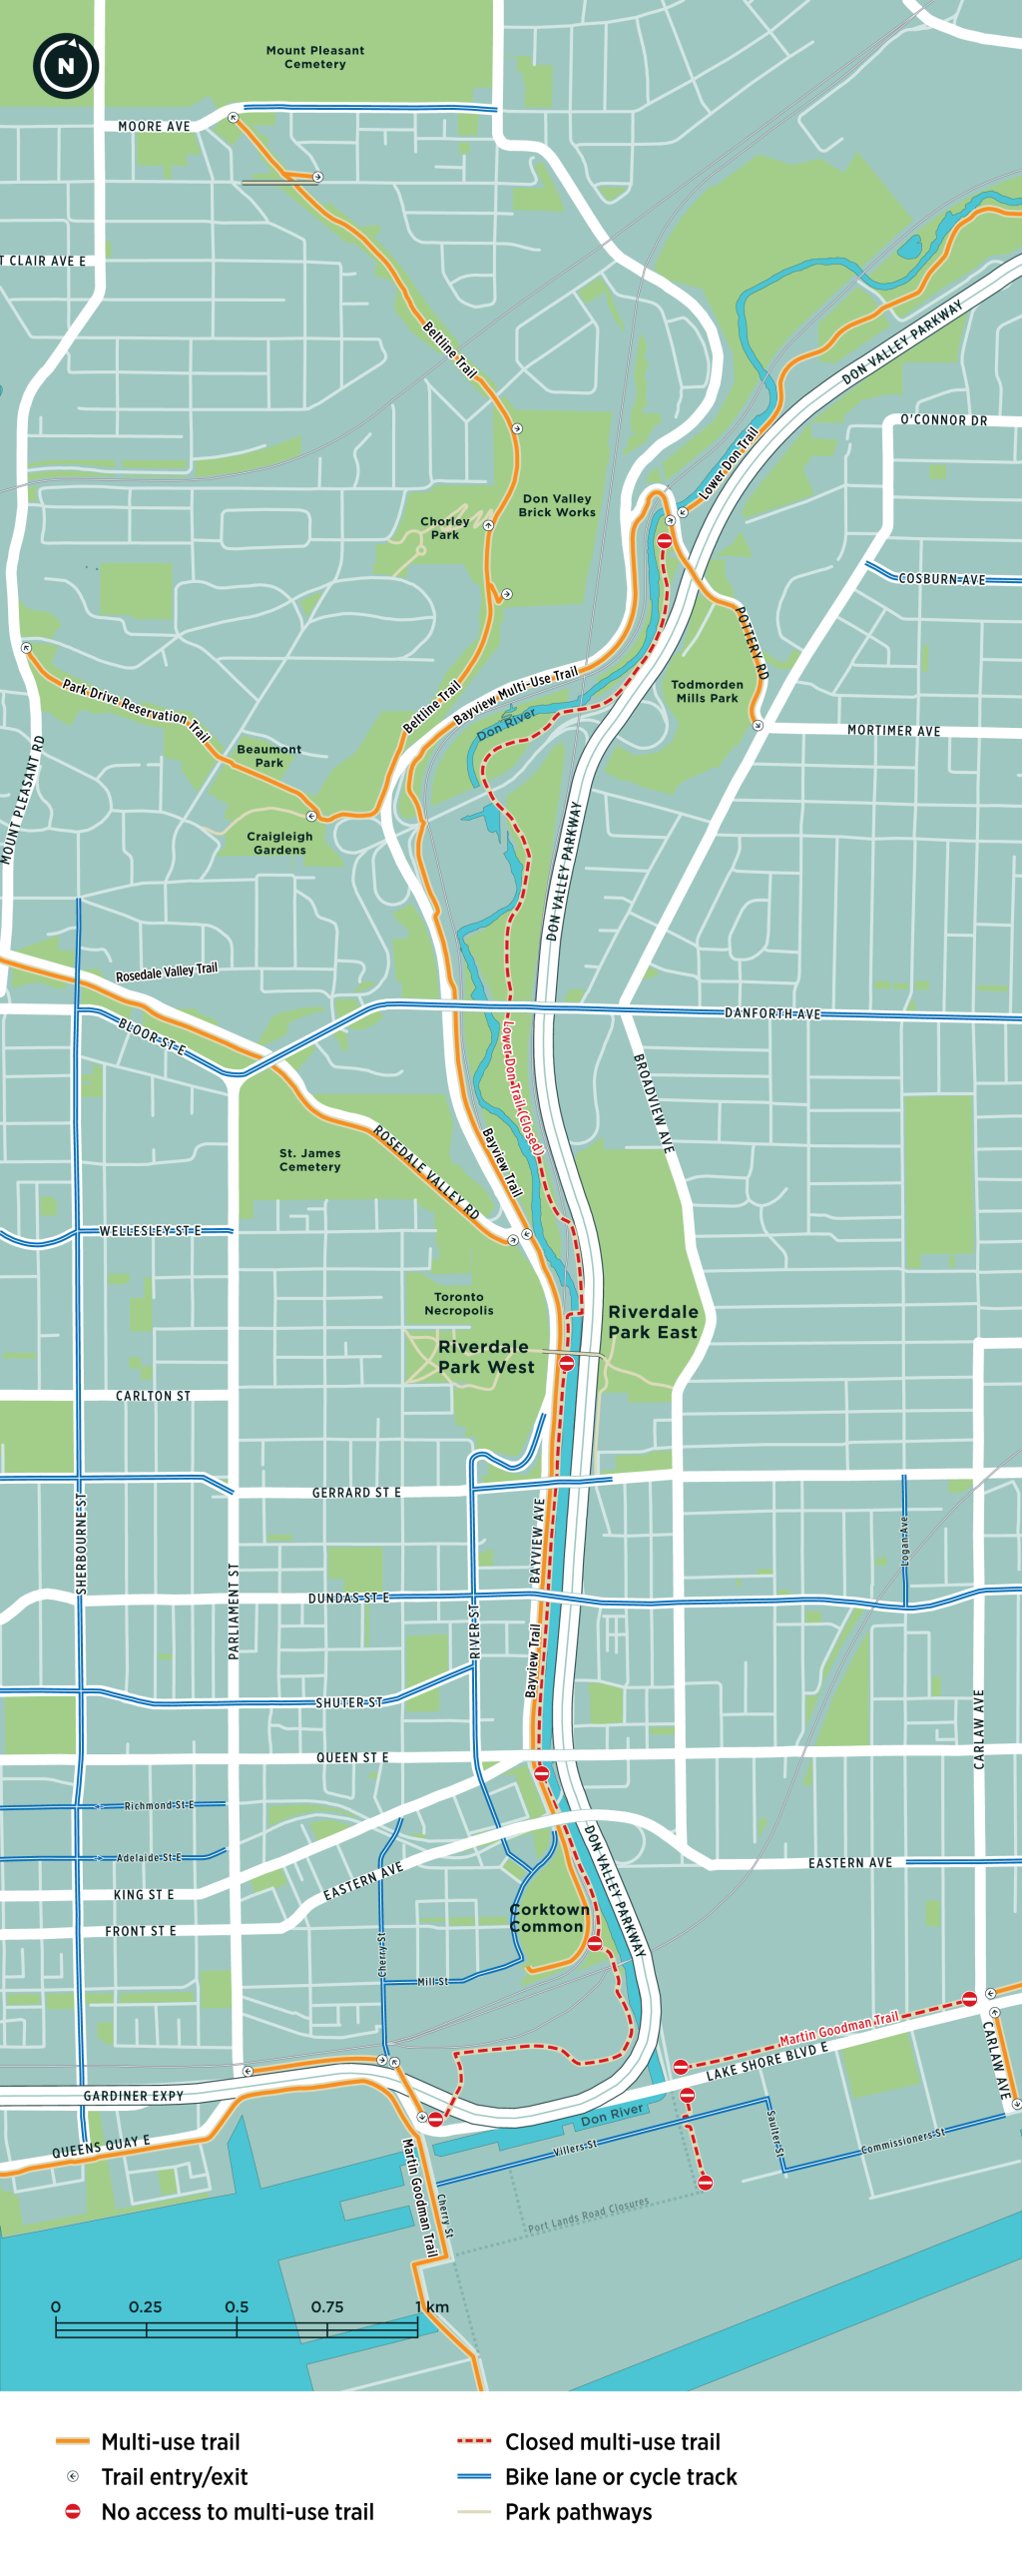 A map of the Lower Don Trail and surrounding area, showing the areas impacted by phase 2 construction for the trail improvements. The multi-use trail running predominantly north-south is shown in orange, a non-entry symbol shows the trail entry points that are closed during construction, a red lined with hash marks shows the closed multi-use trail, and the bike lane or cycle track is shown with a blue line. 